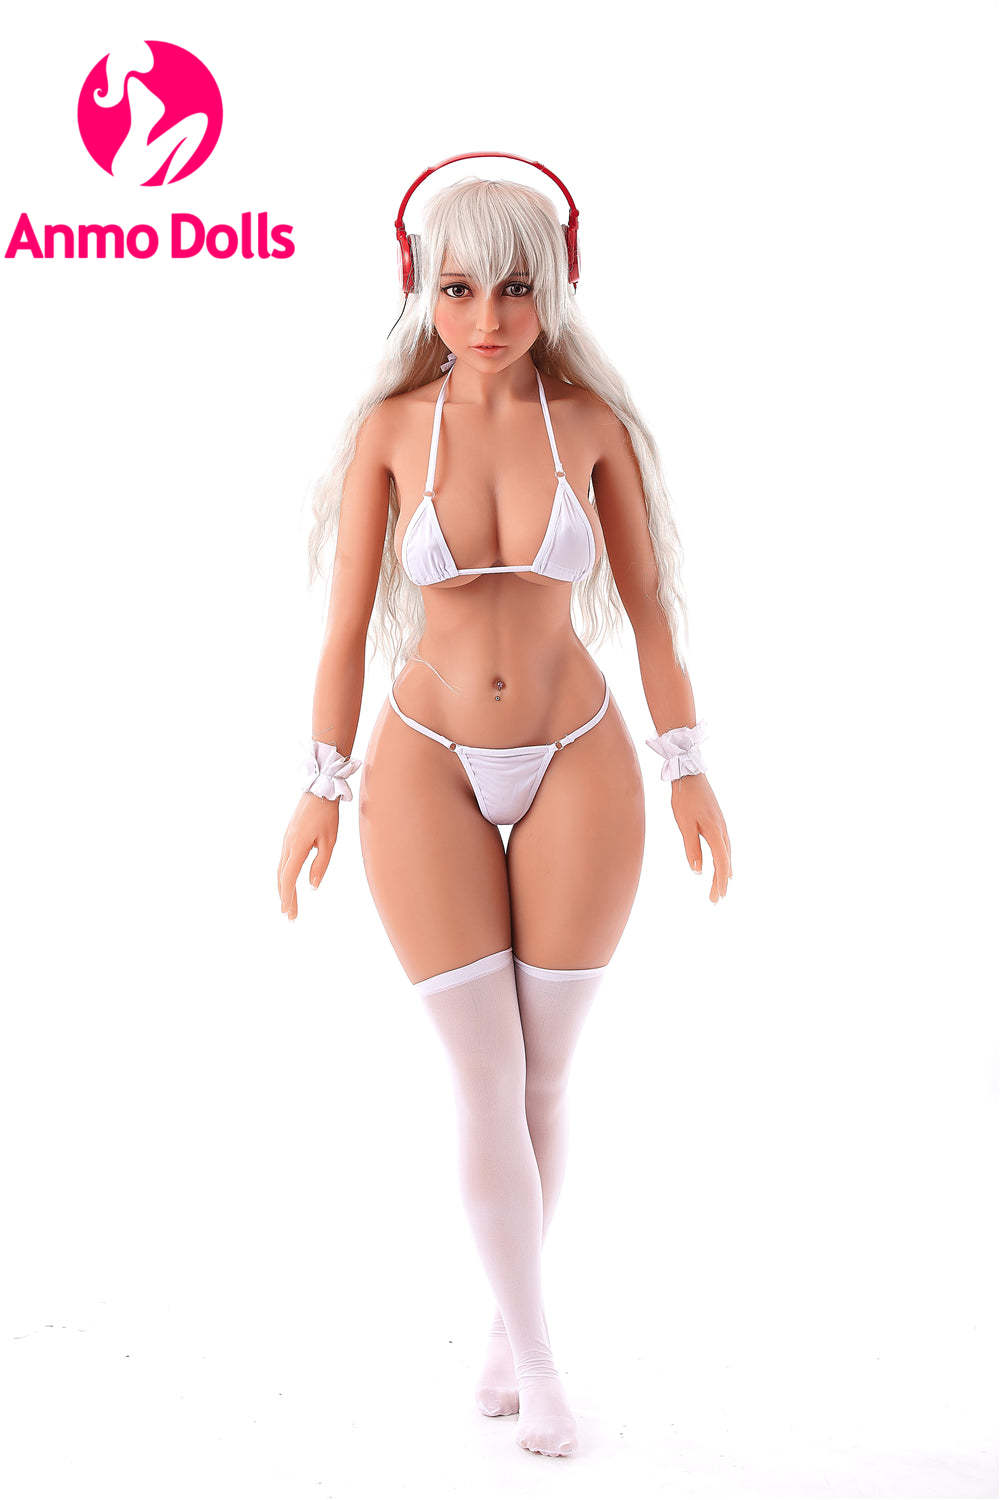 Minyase - Cute Sex Doll with Gray Hair - TPE Sex doll by Anmodolls